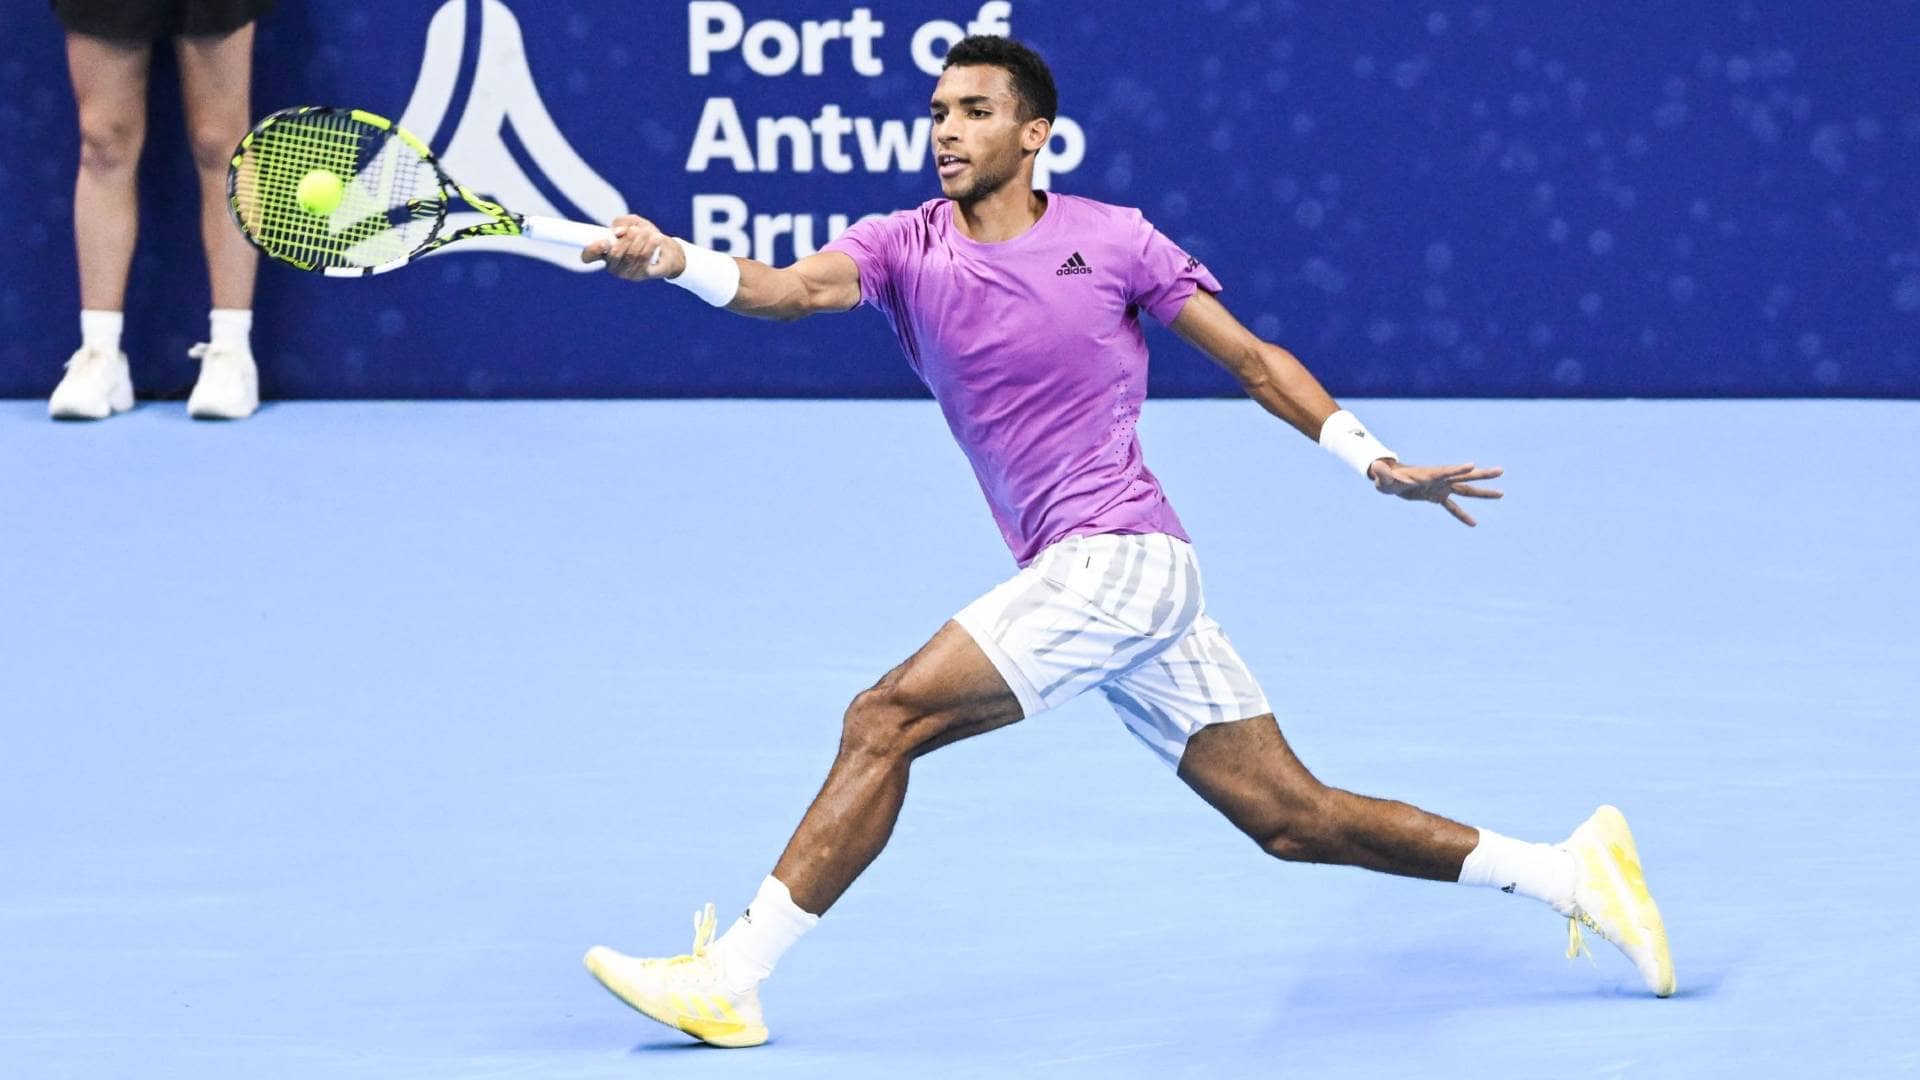 Auger-Aliassime Reaches Second Straight Final in Antwerp